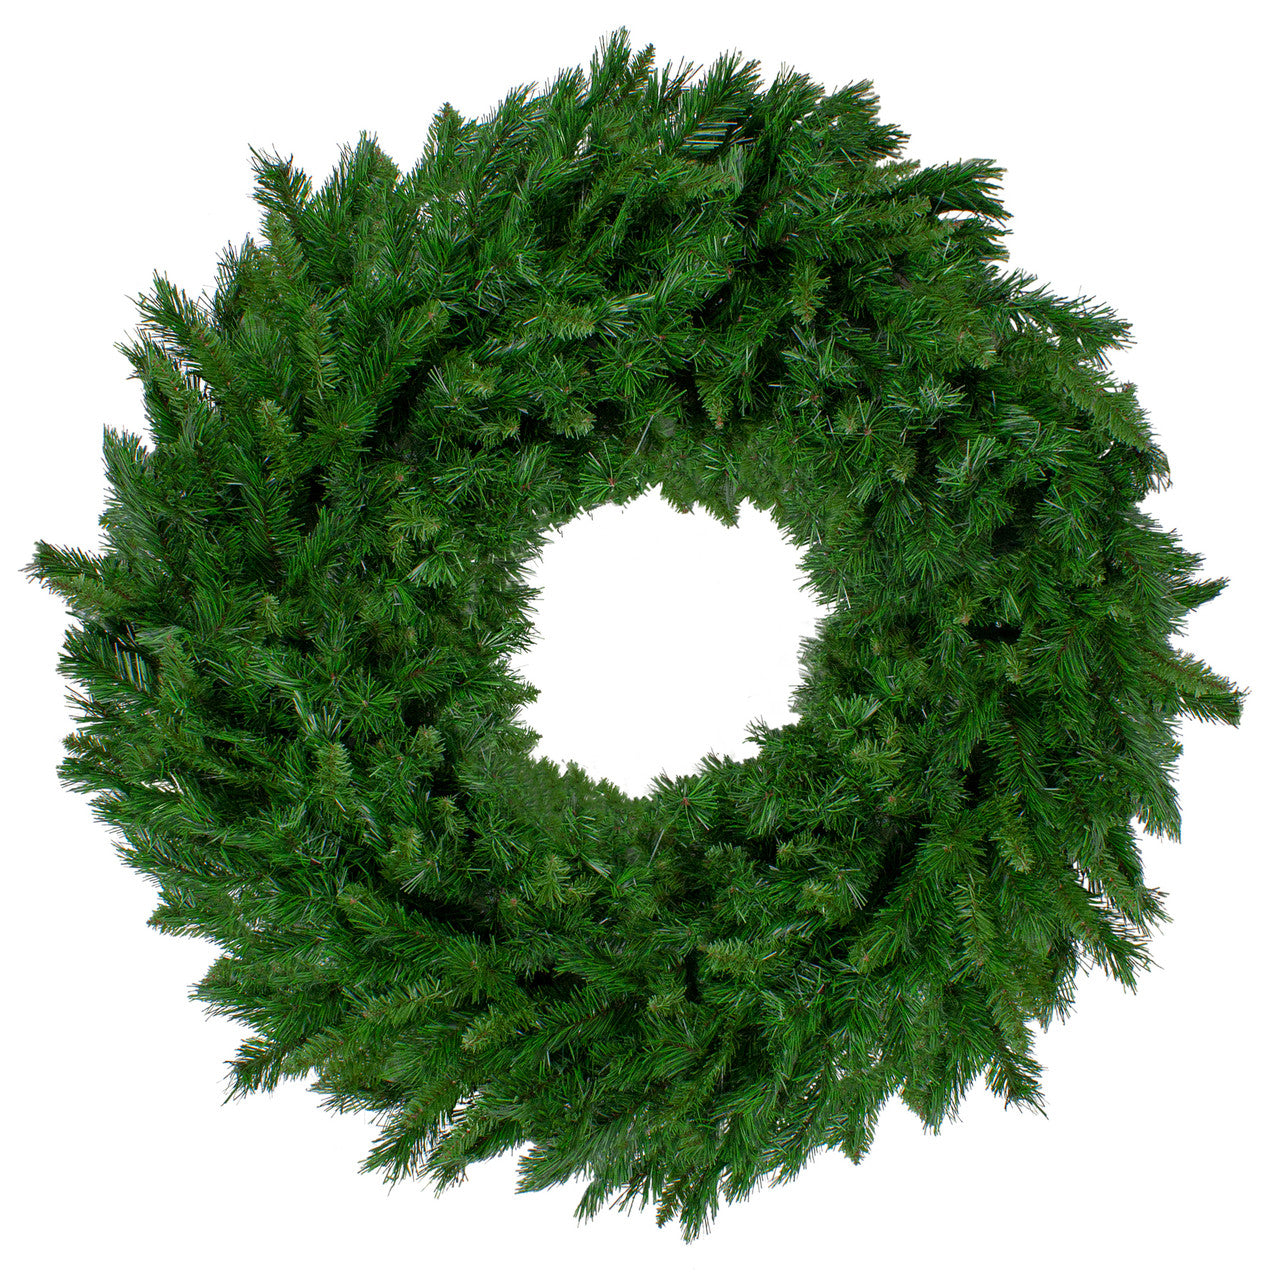 Lush Mixed Pine Artificial Christmas Wreath, 48-Inch, Unlit